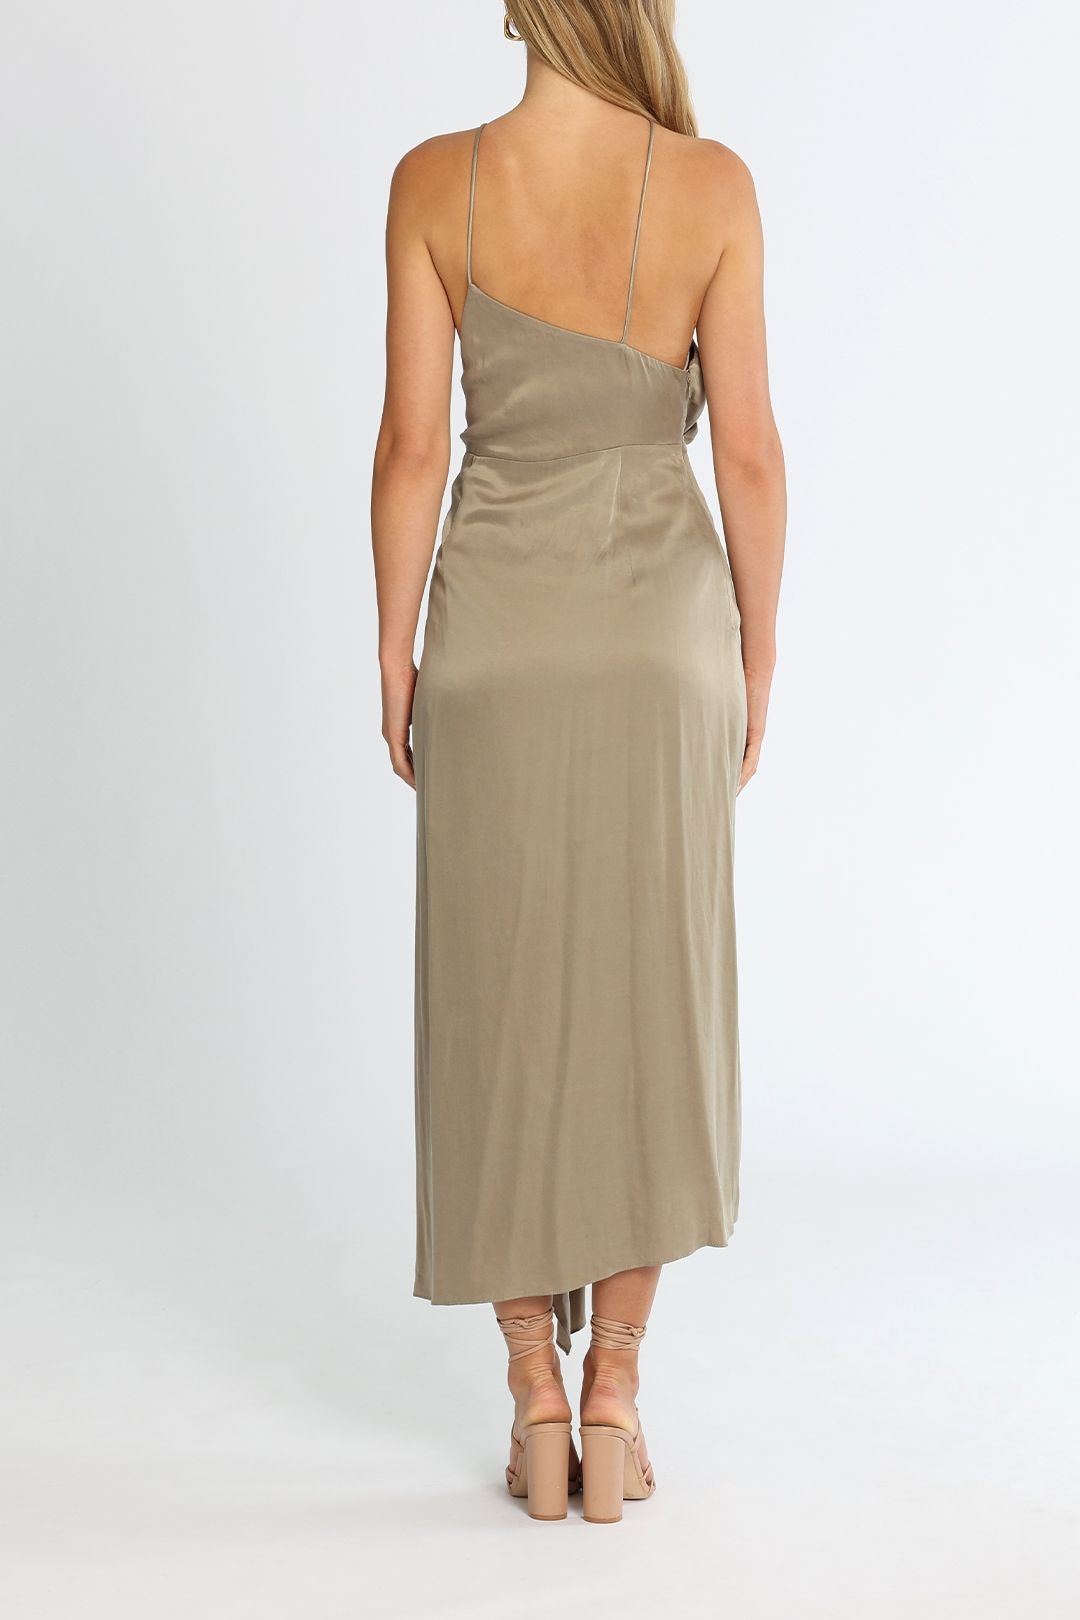 Significant Other Athena Dress Taupe Asymmetrical